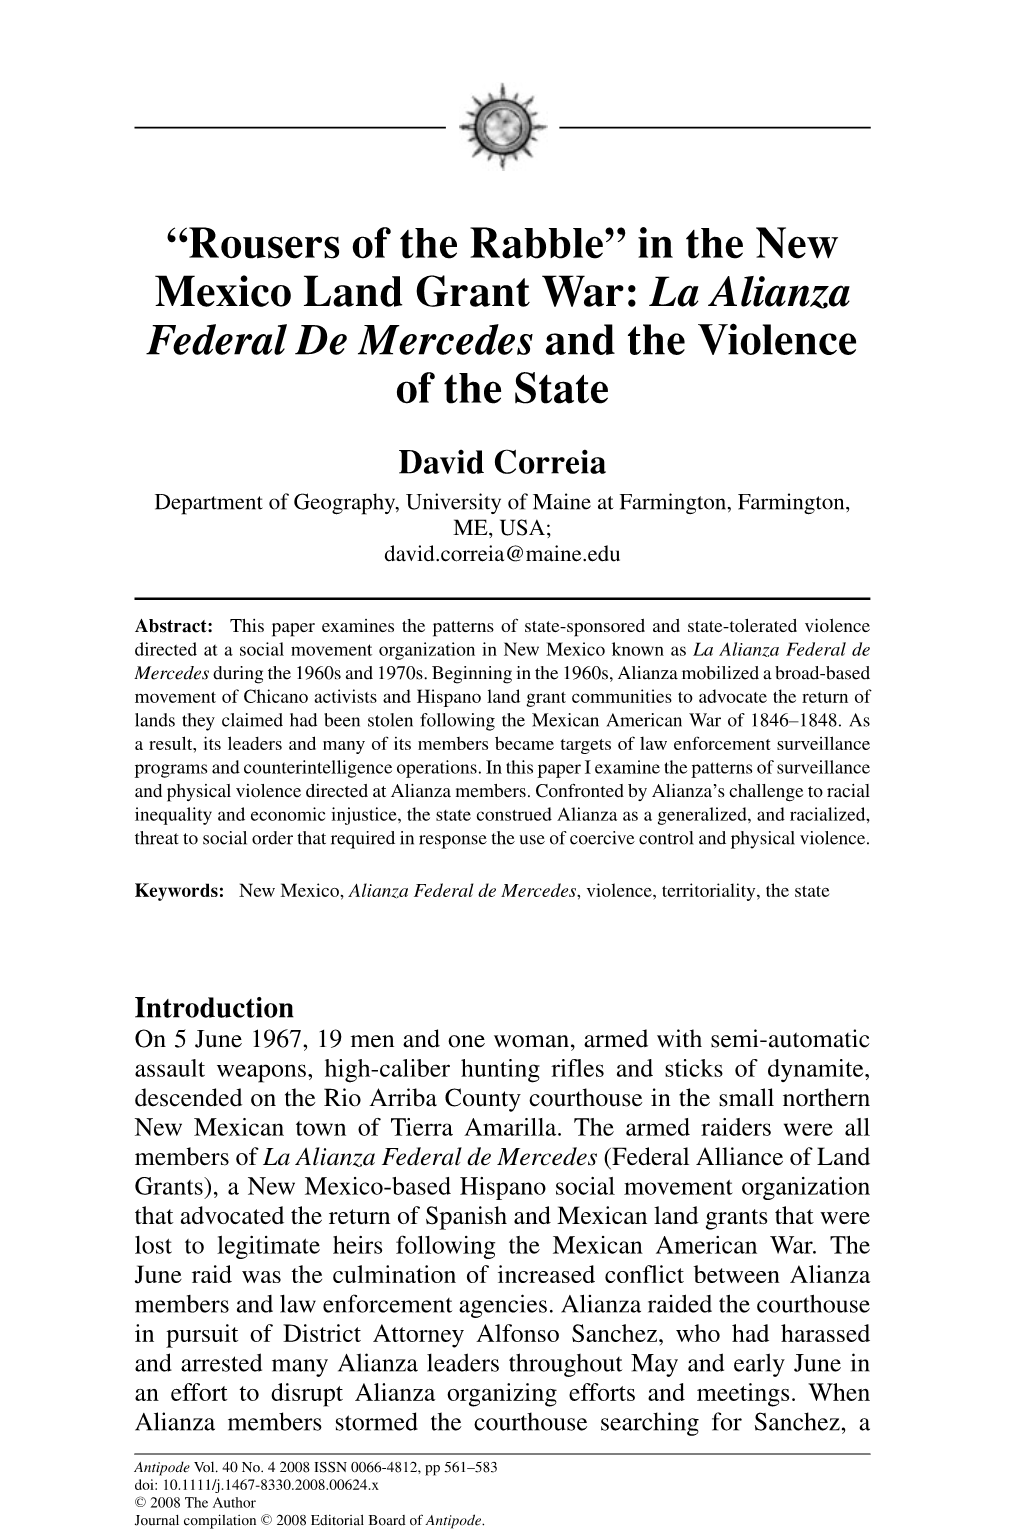 “Rousers of the Rabble” in the New Mexico Land Grant War: La Alianza Federal De Mercedes and the Violence of the State